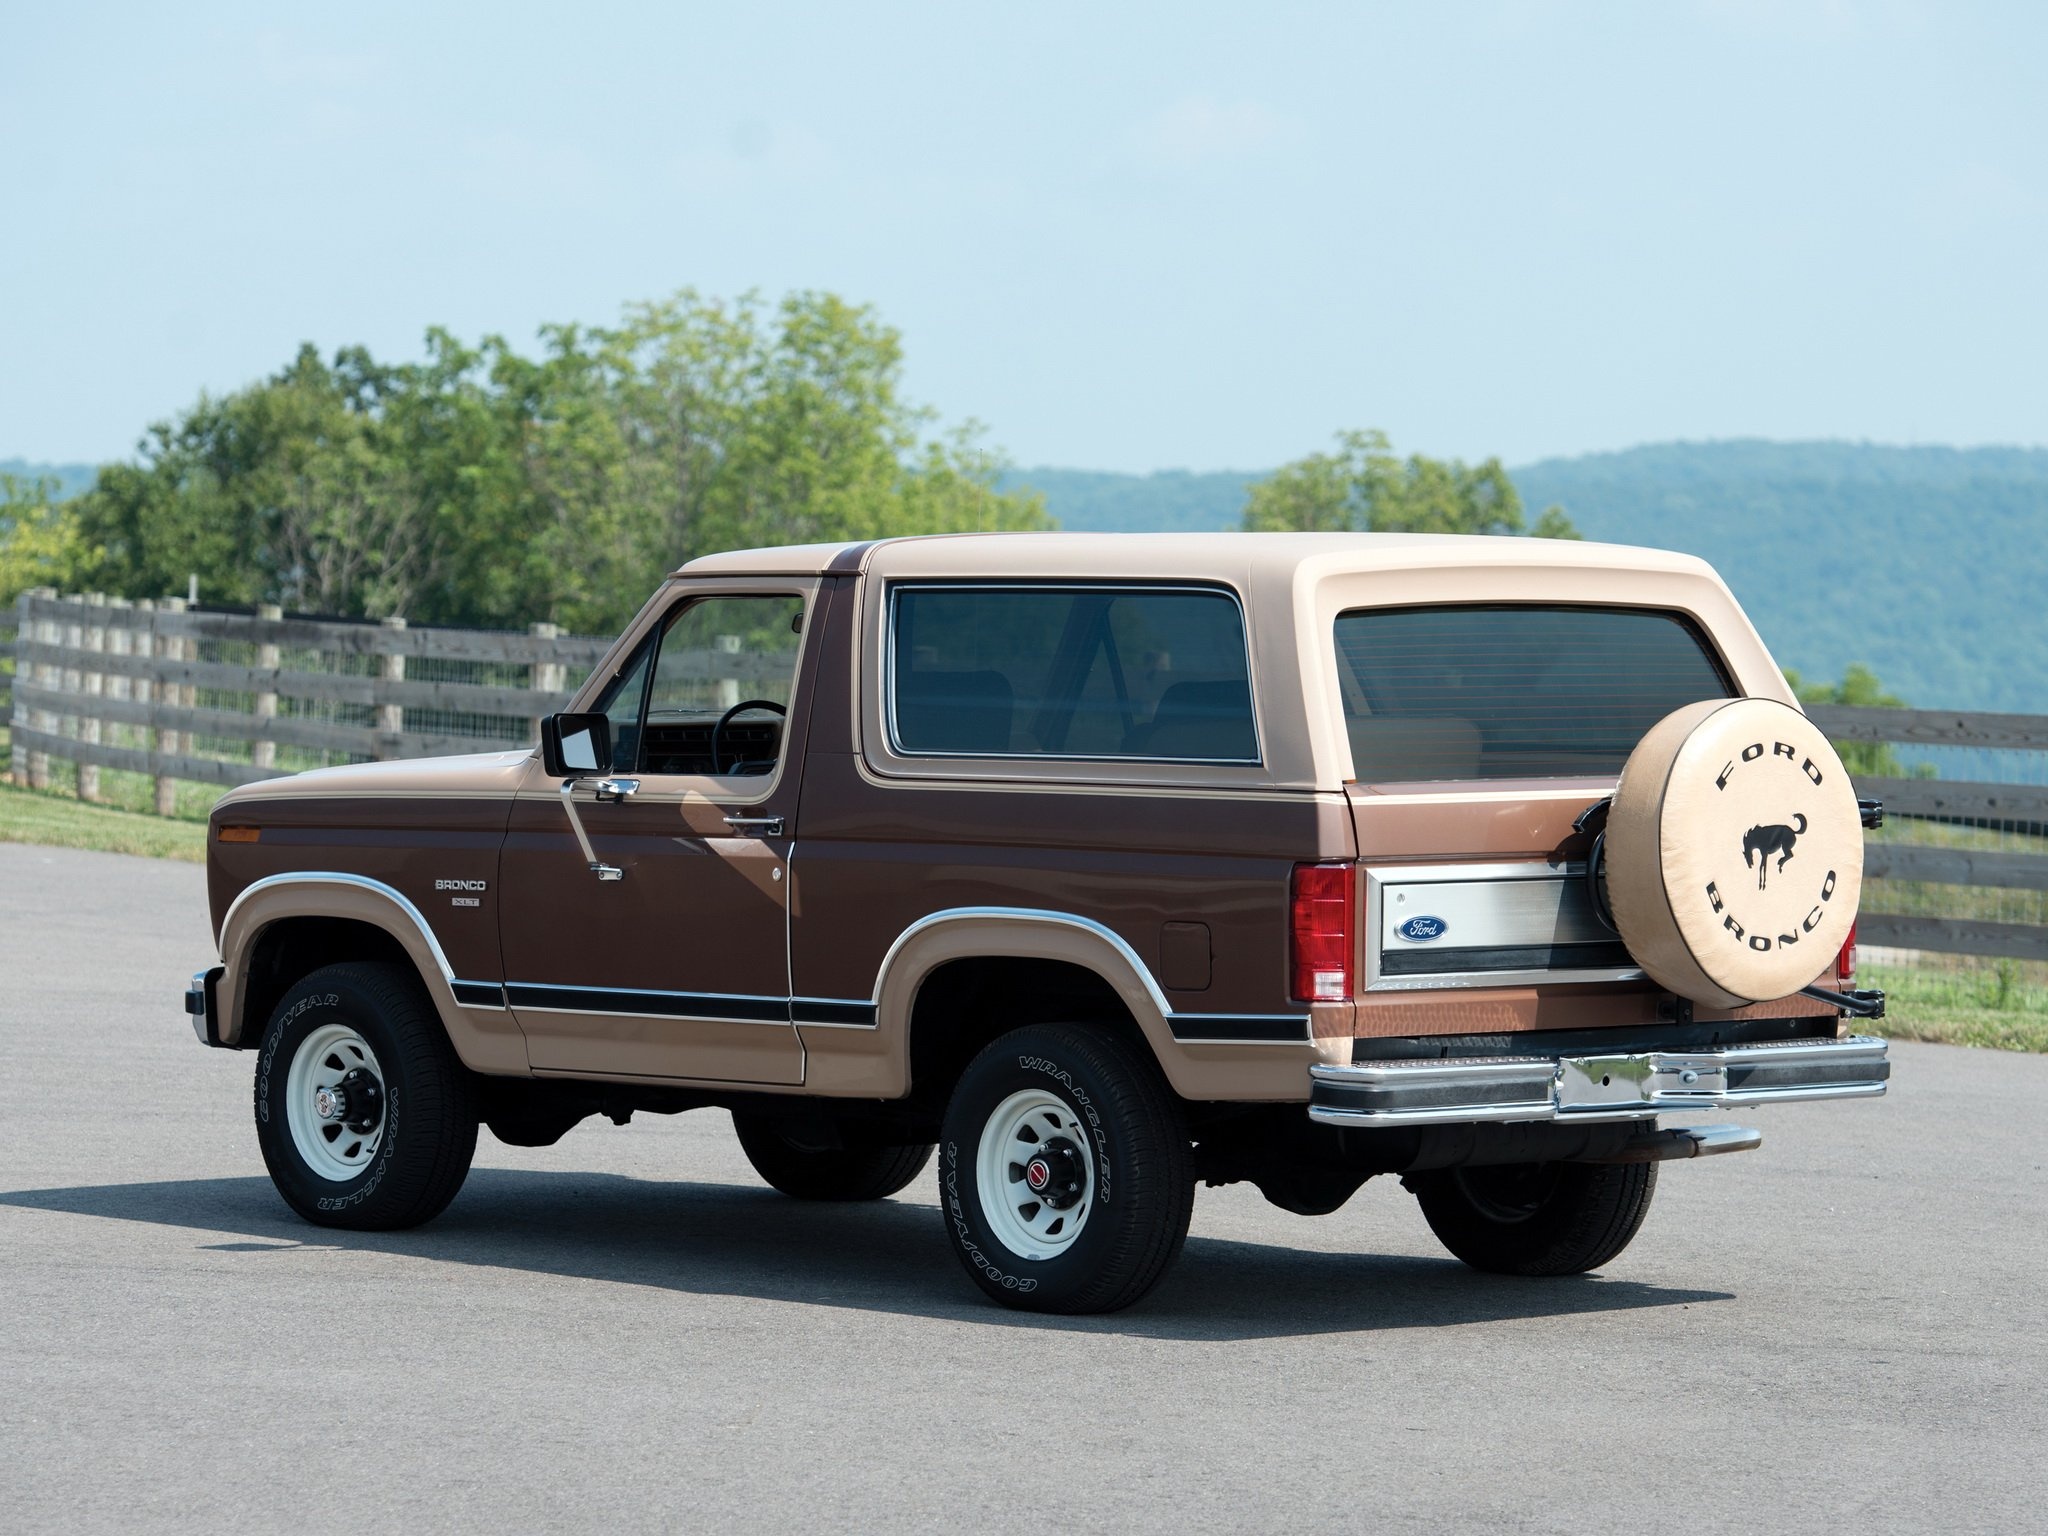 Ford Bronco: Ford Bronco XLT, SUV 4x4, Roomy Trunk, Family Car Of 1982, Machine For Cross-country. 2050x1540 HD Wallpaper.